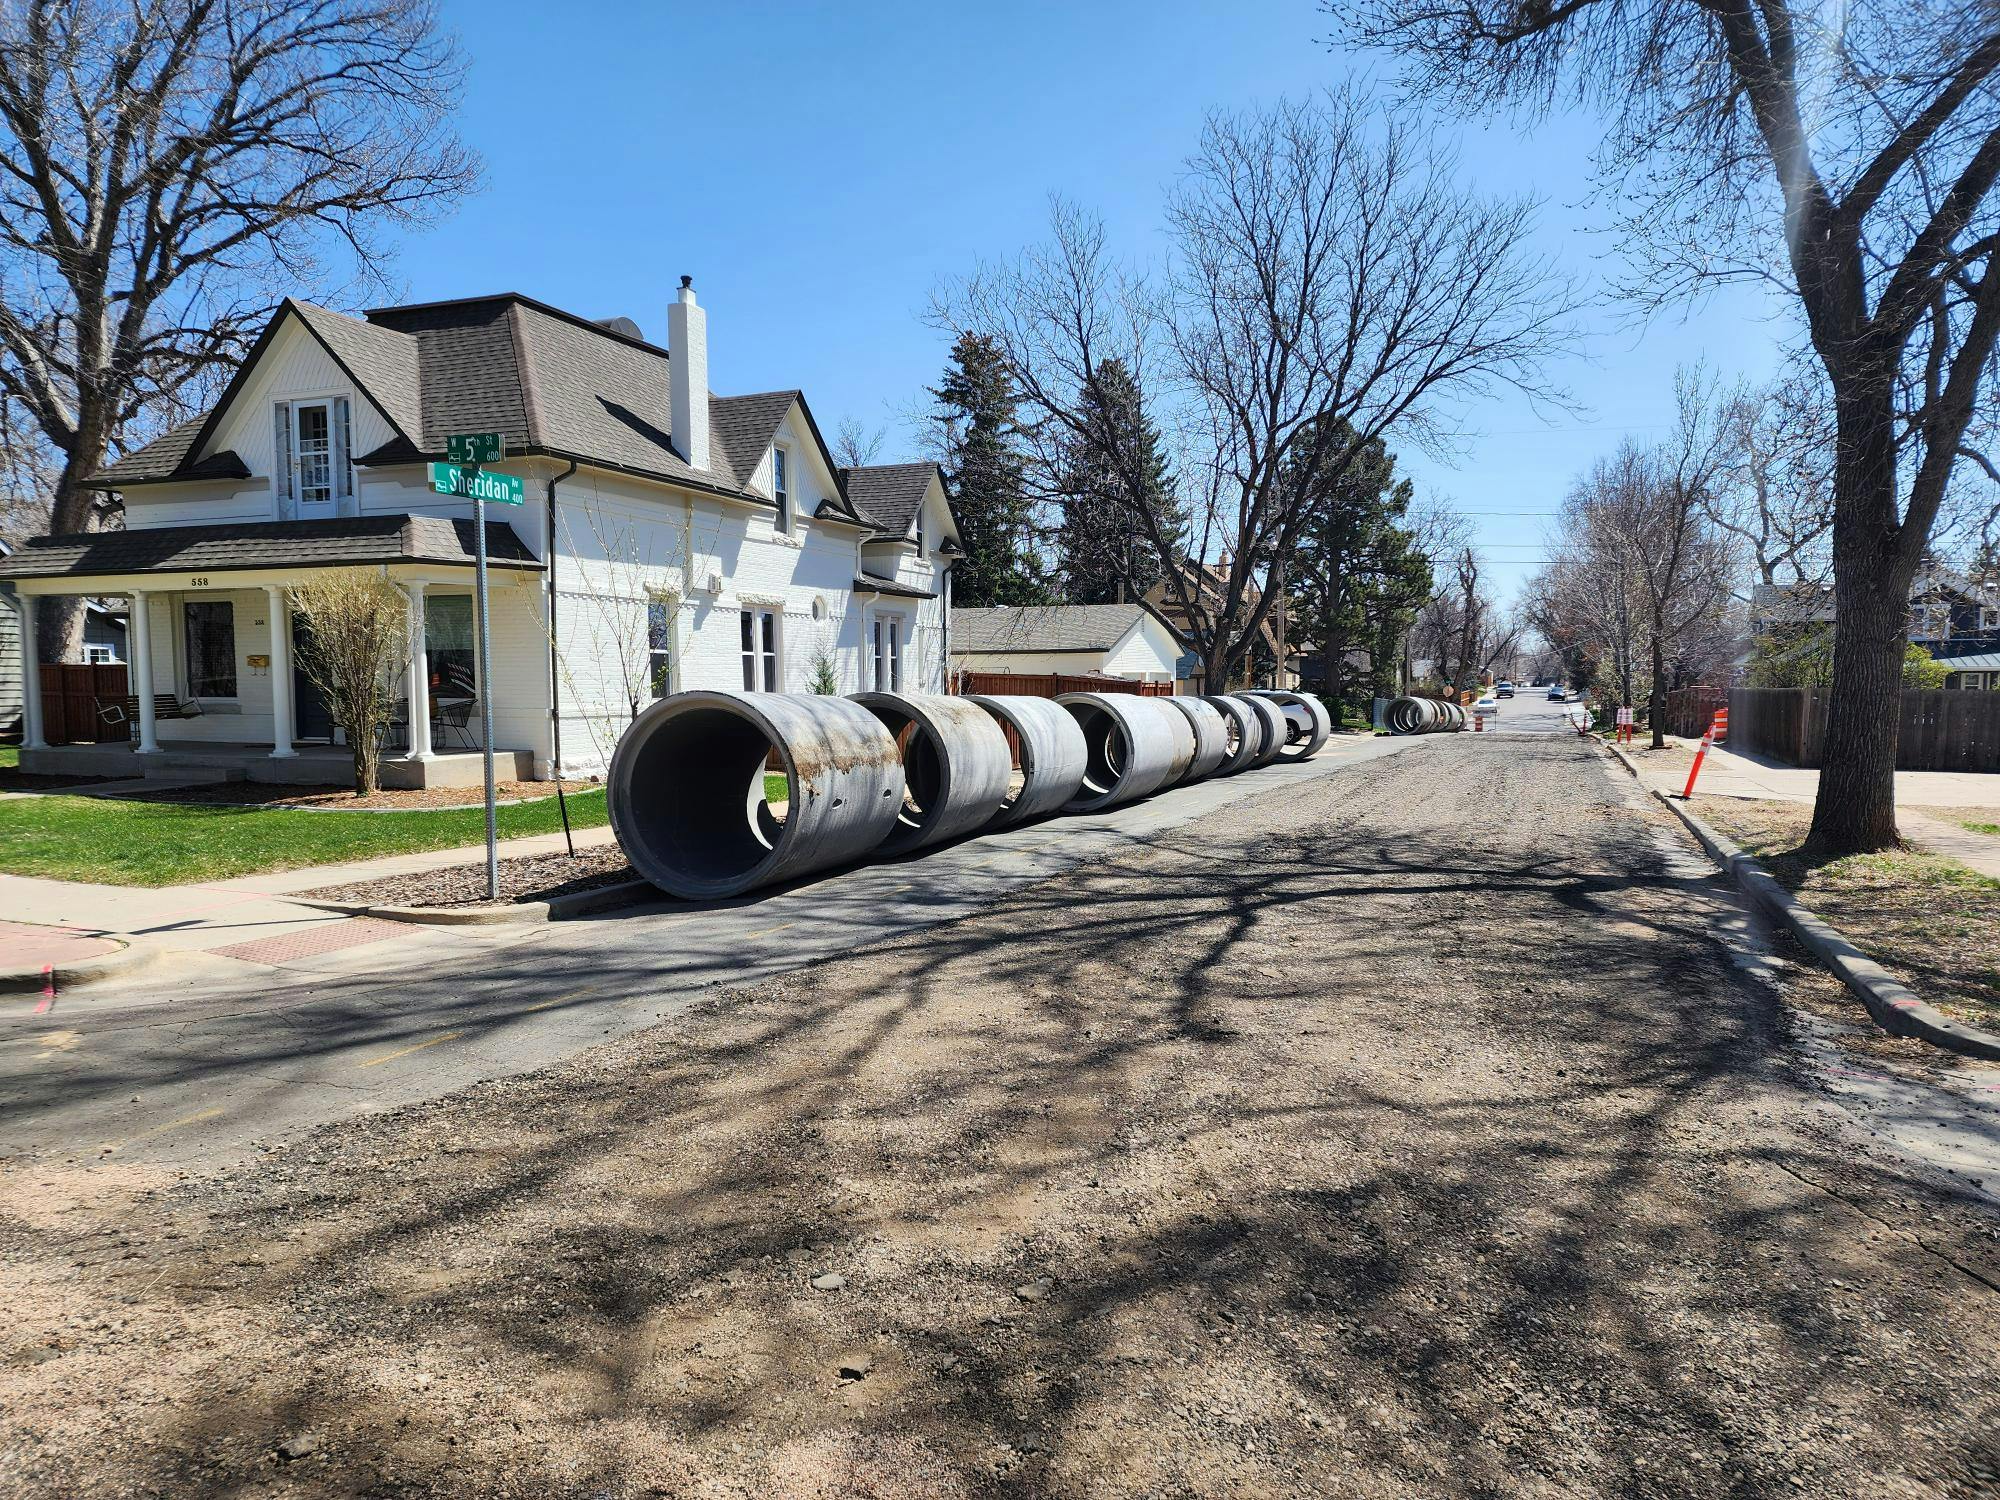 The storm sewer segments are large and heavy as they are lined up for installation.